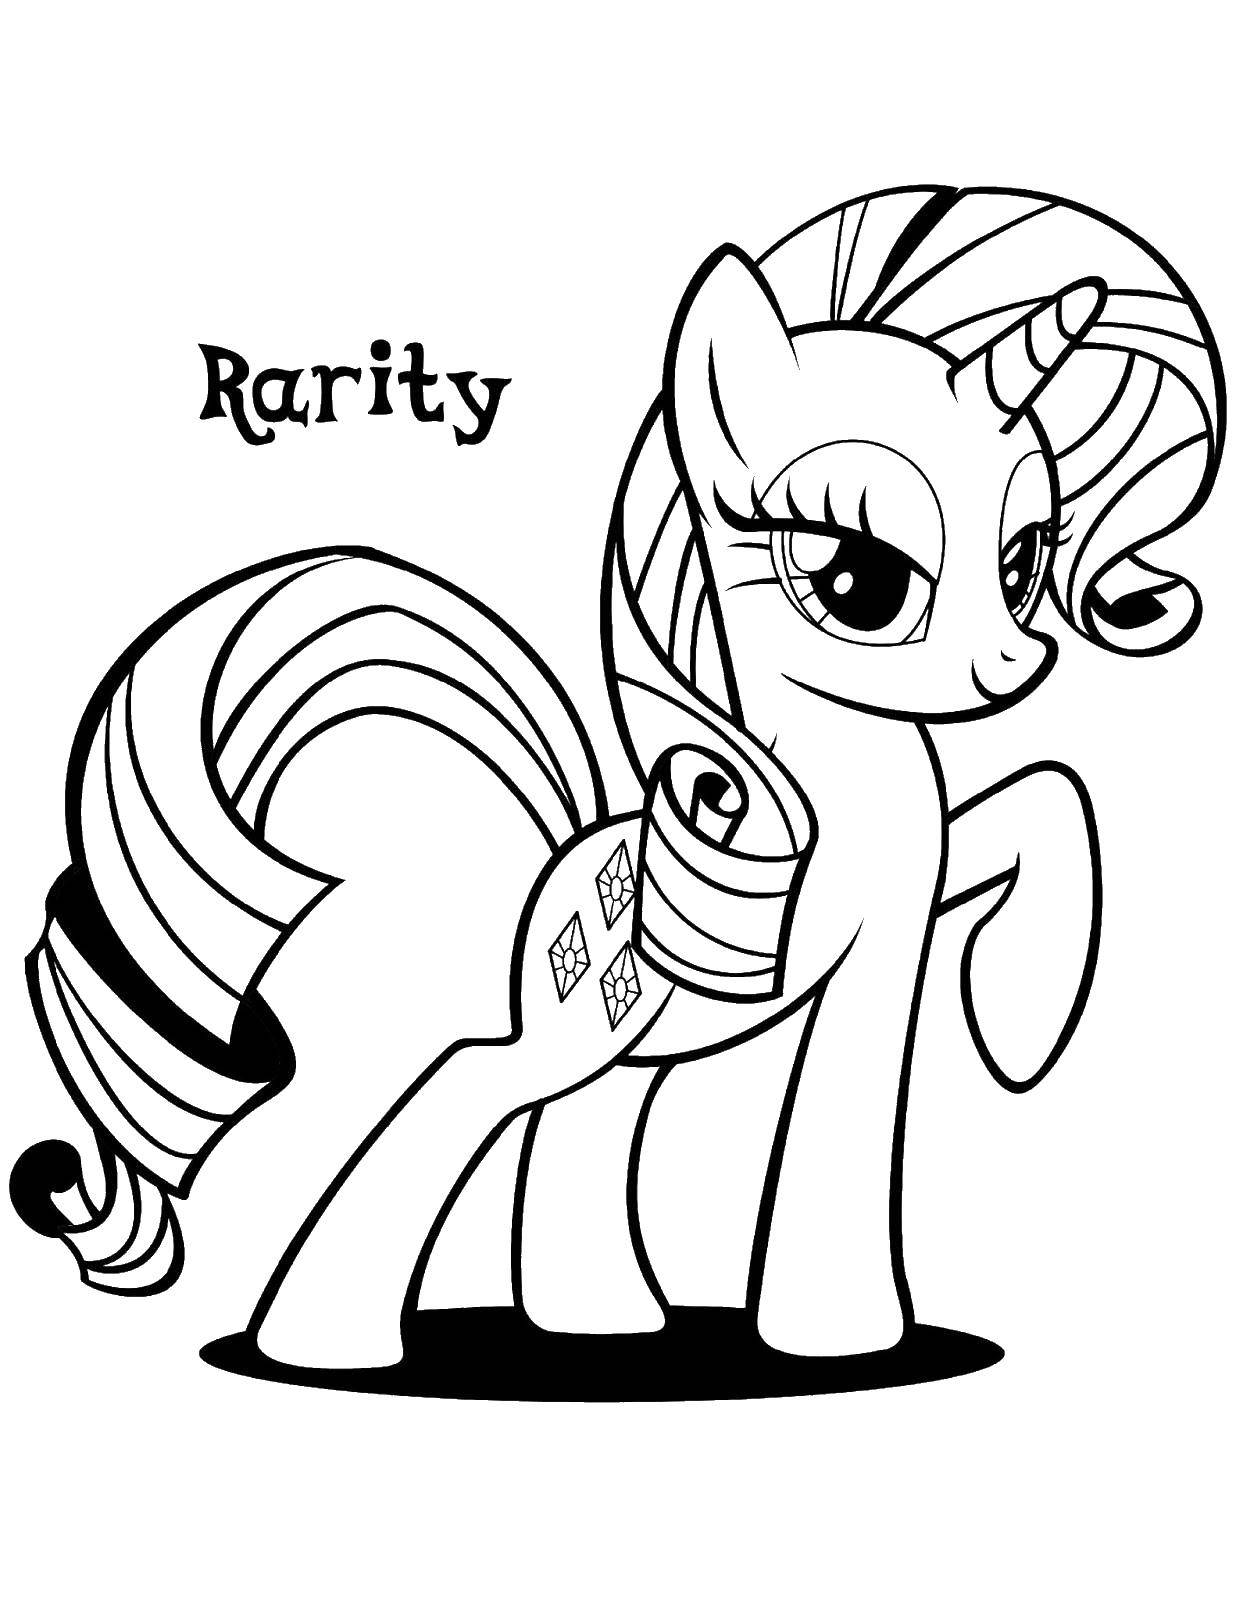 Coloring Rarity. Category my little pony. Tags:  my little pony, horses.